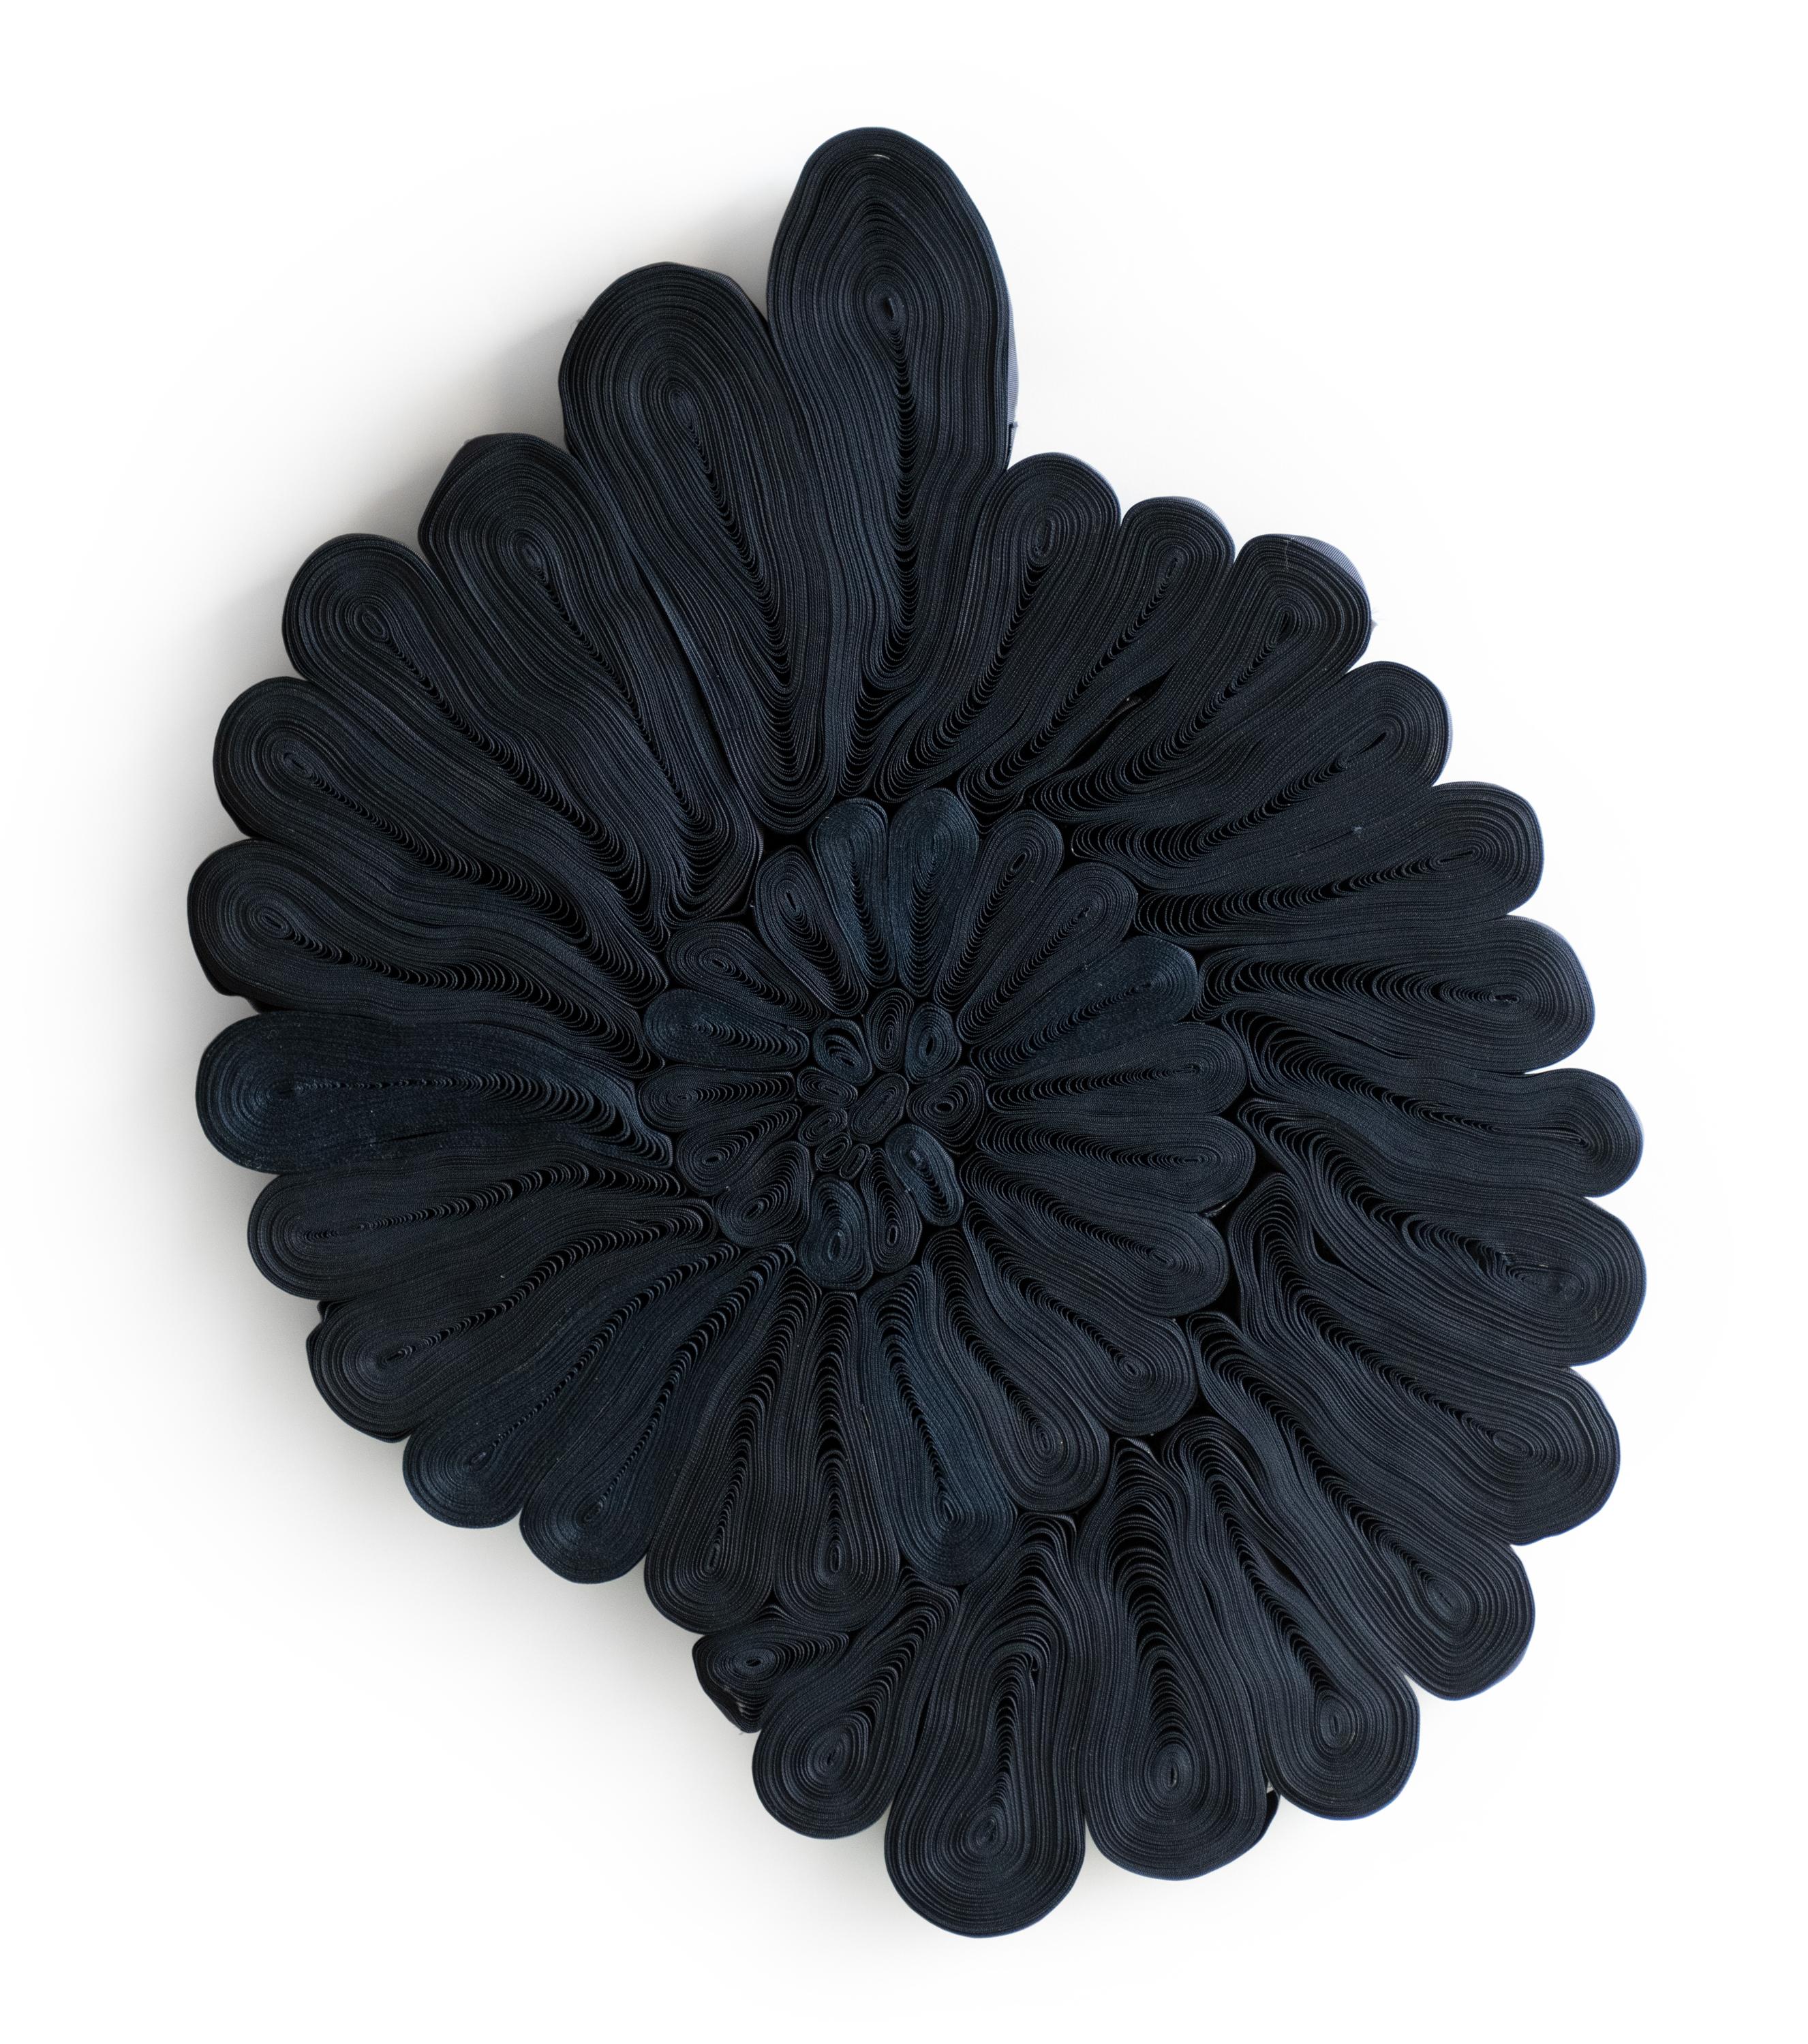 Contemporary textile artist, Aiveen Daly has launched her debut series of personal work ‘Coralation’ inspired by oceanic life. These unique ribbon sculptures are meditative, delicate artworks painstakingly hand pleated and manipulated using FSC